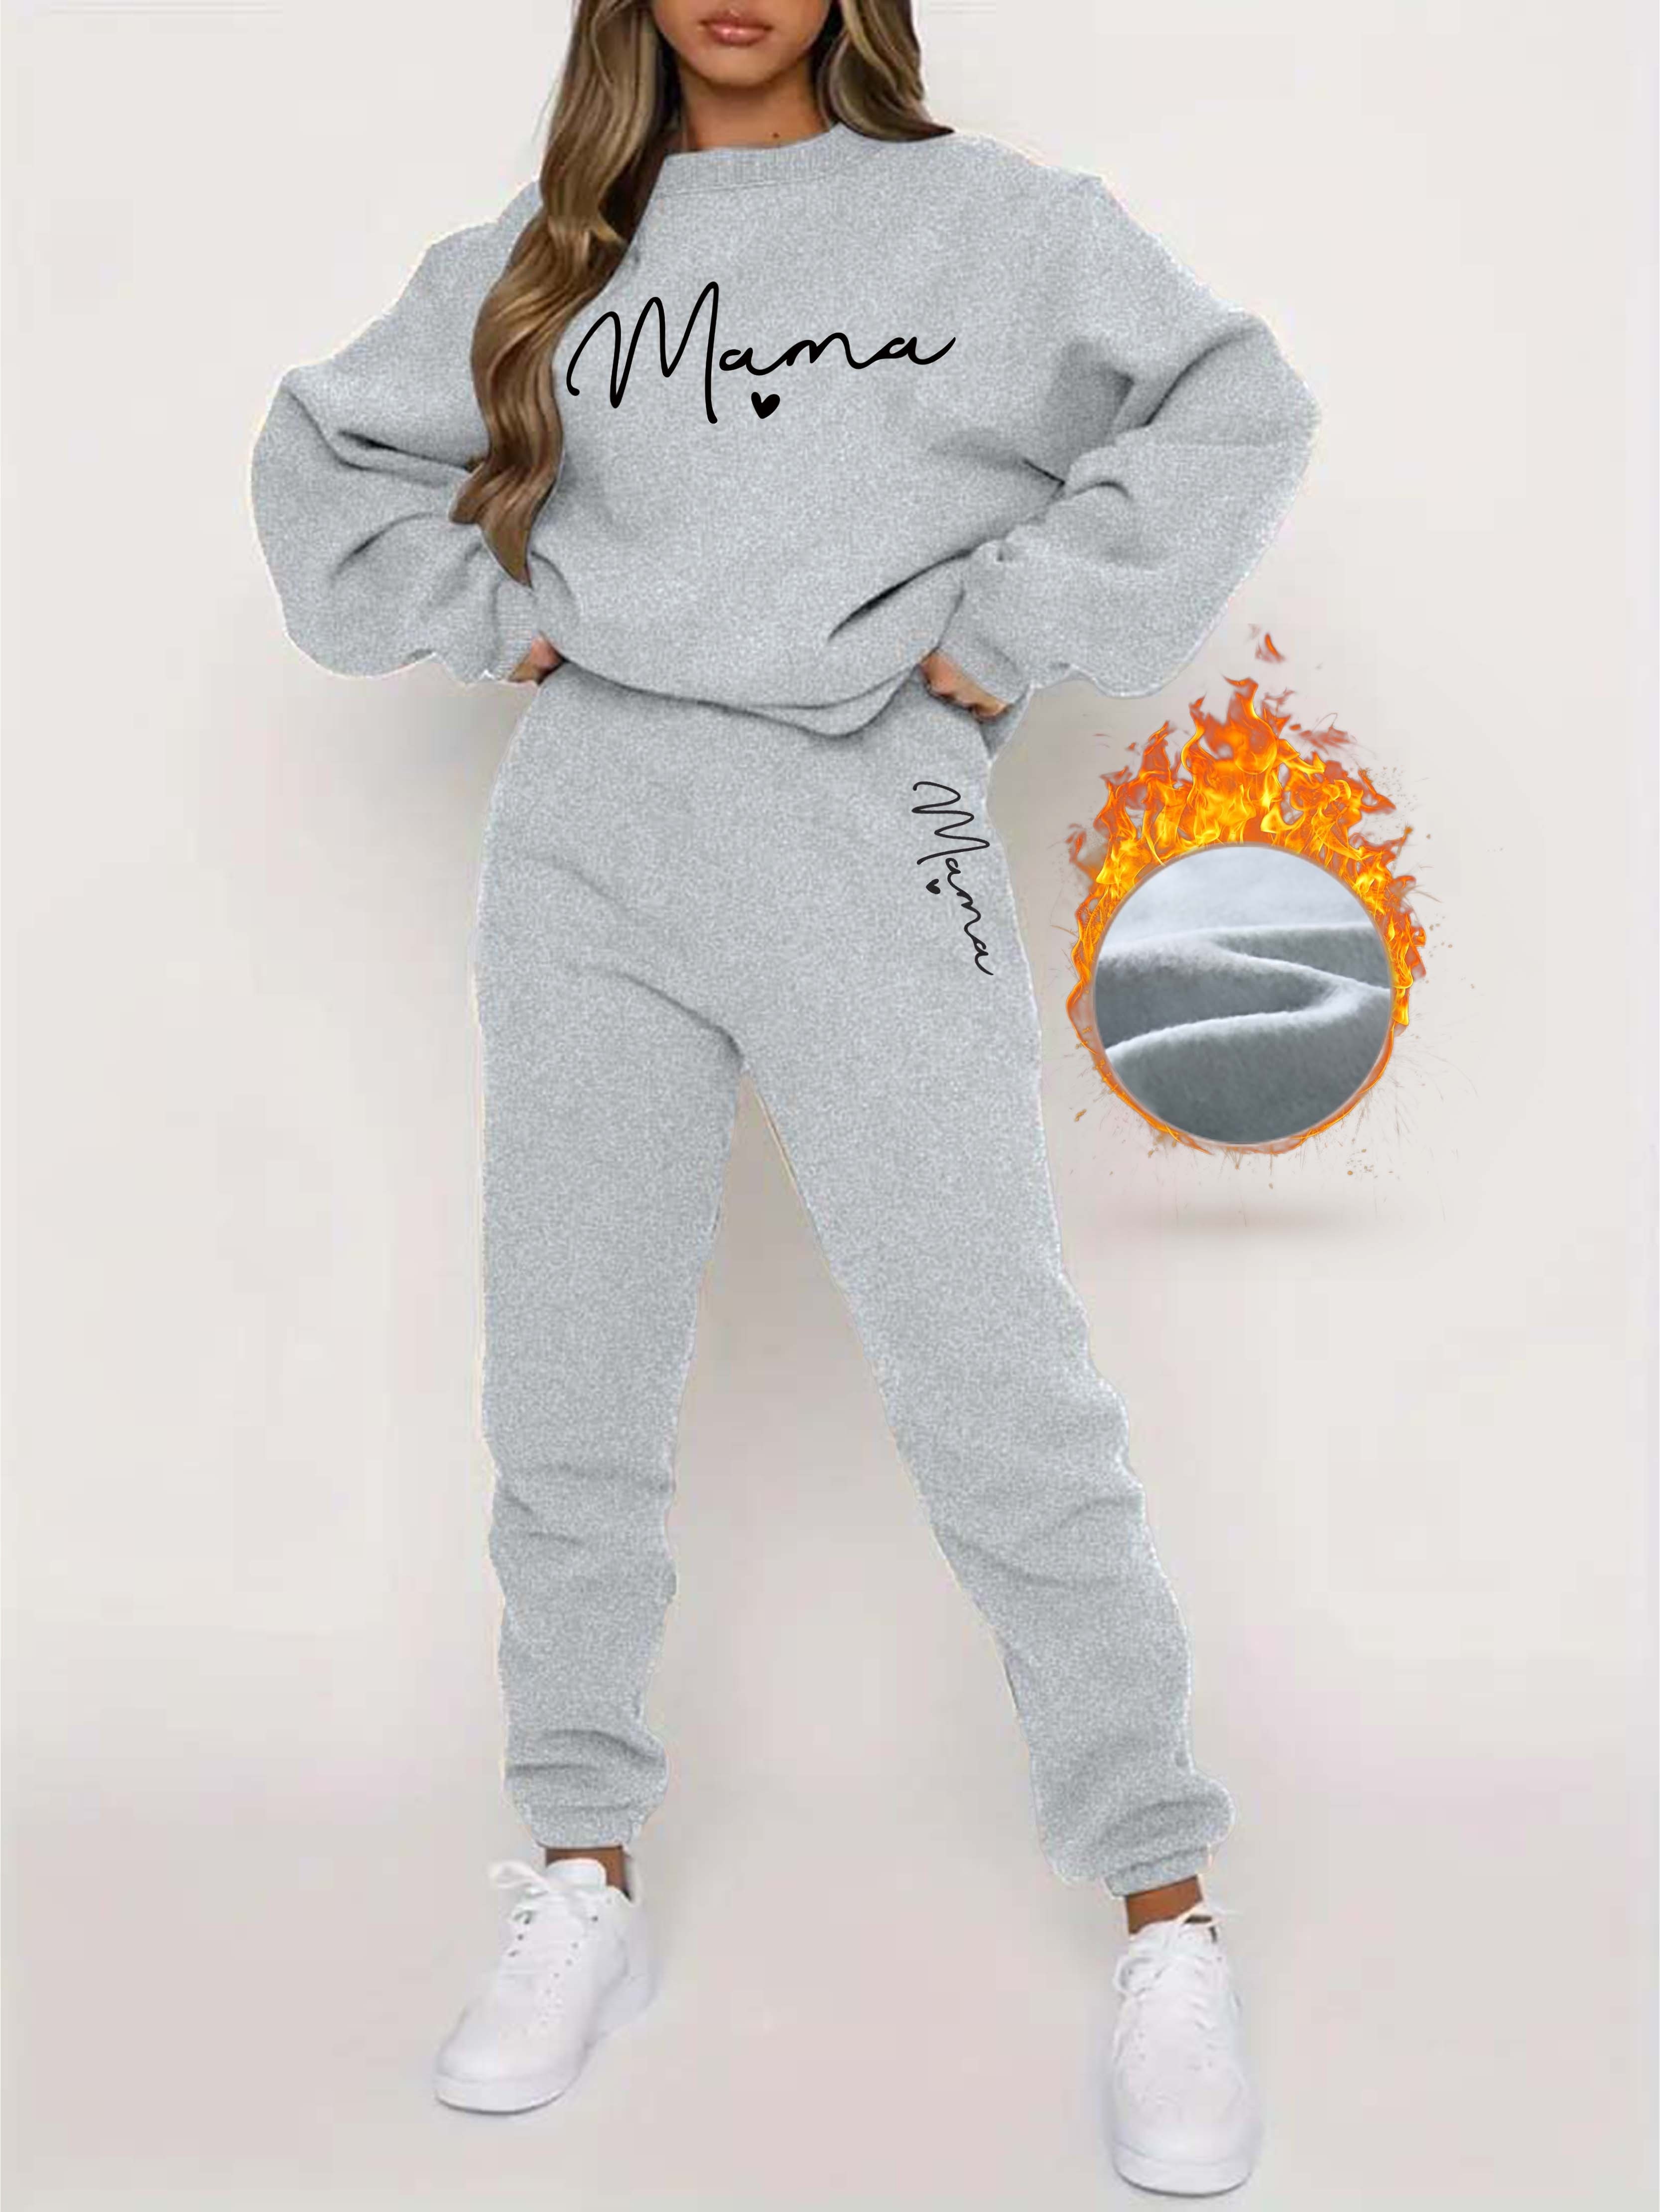 Tracksuit Women/ Oversized Hoodie and Sweatpants/ Tracksuit Set/ Comfy  Sweatsuit/ Jogger Set Women/ Homewear Women/ Two Piece Set Woman Set 